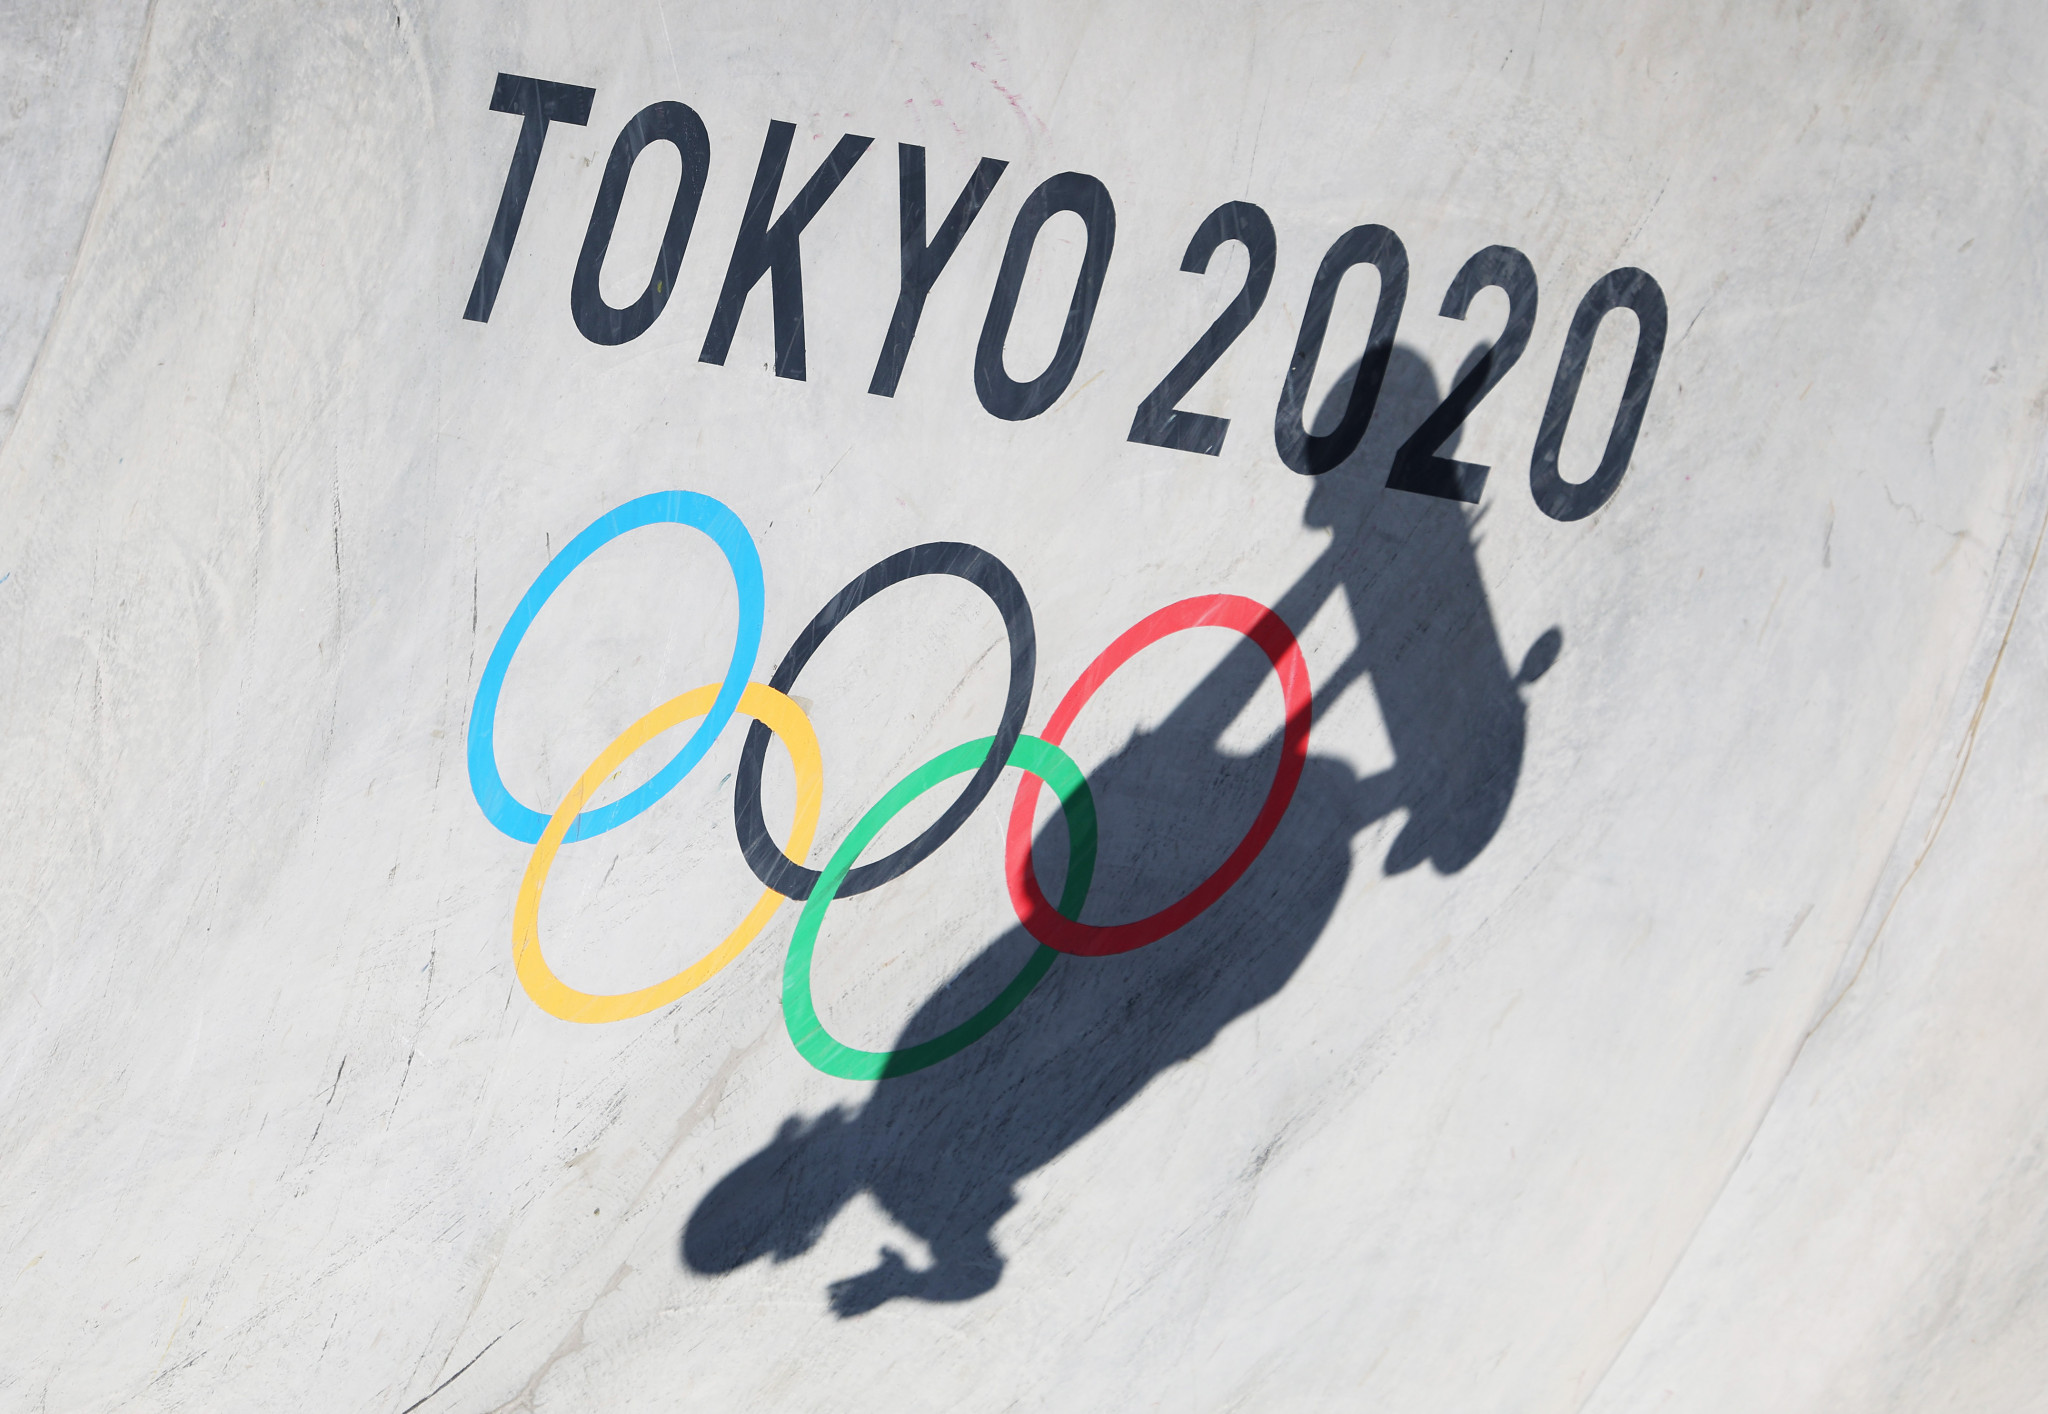 The corruption scandal surrounding the Tokyo 2020 Olympic Games is growing ©Getty Images